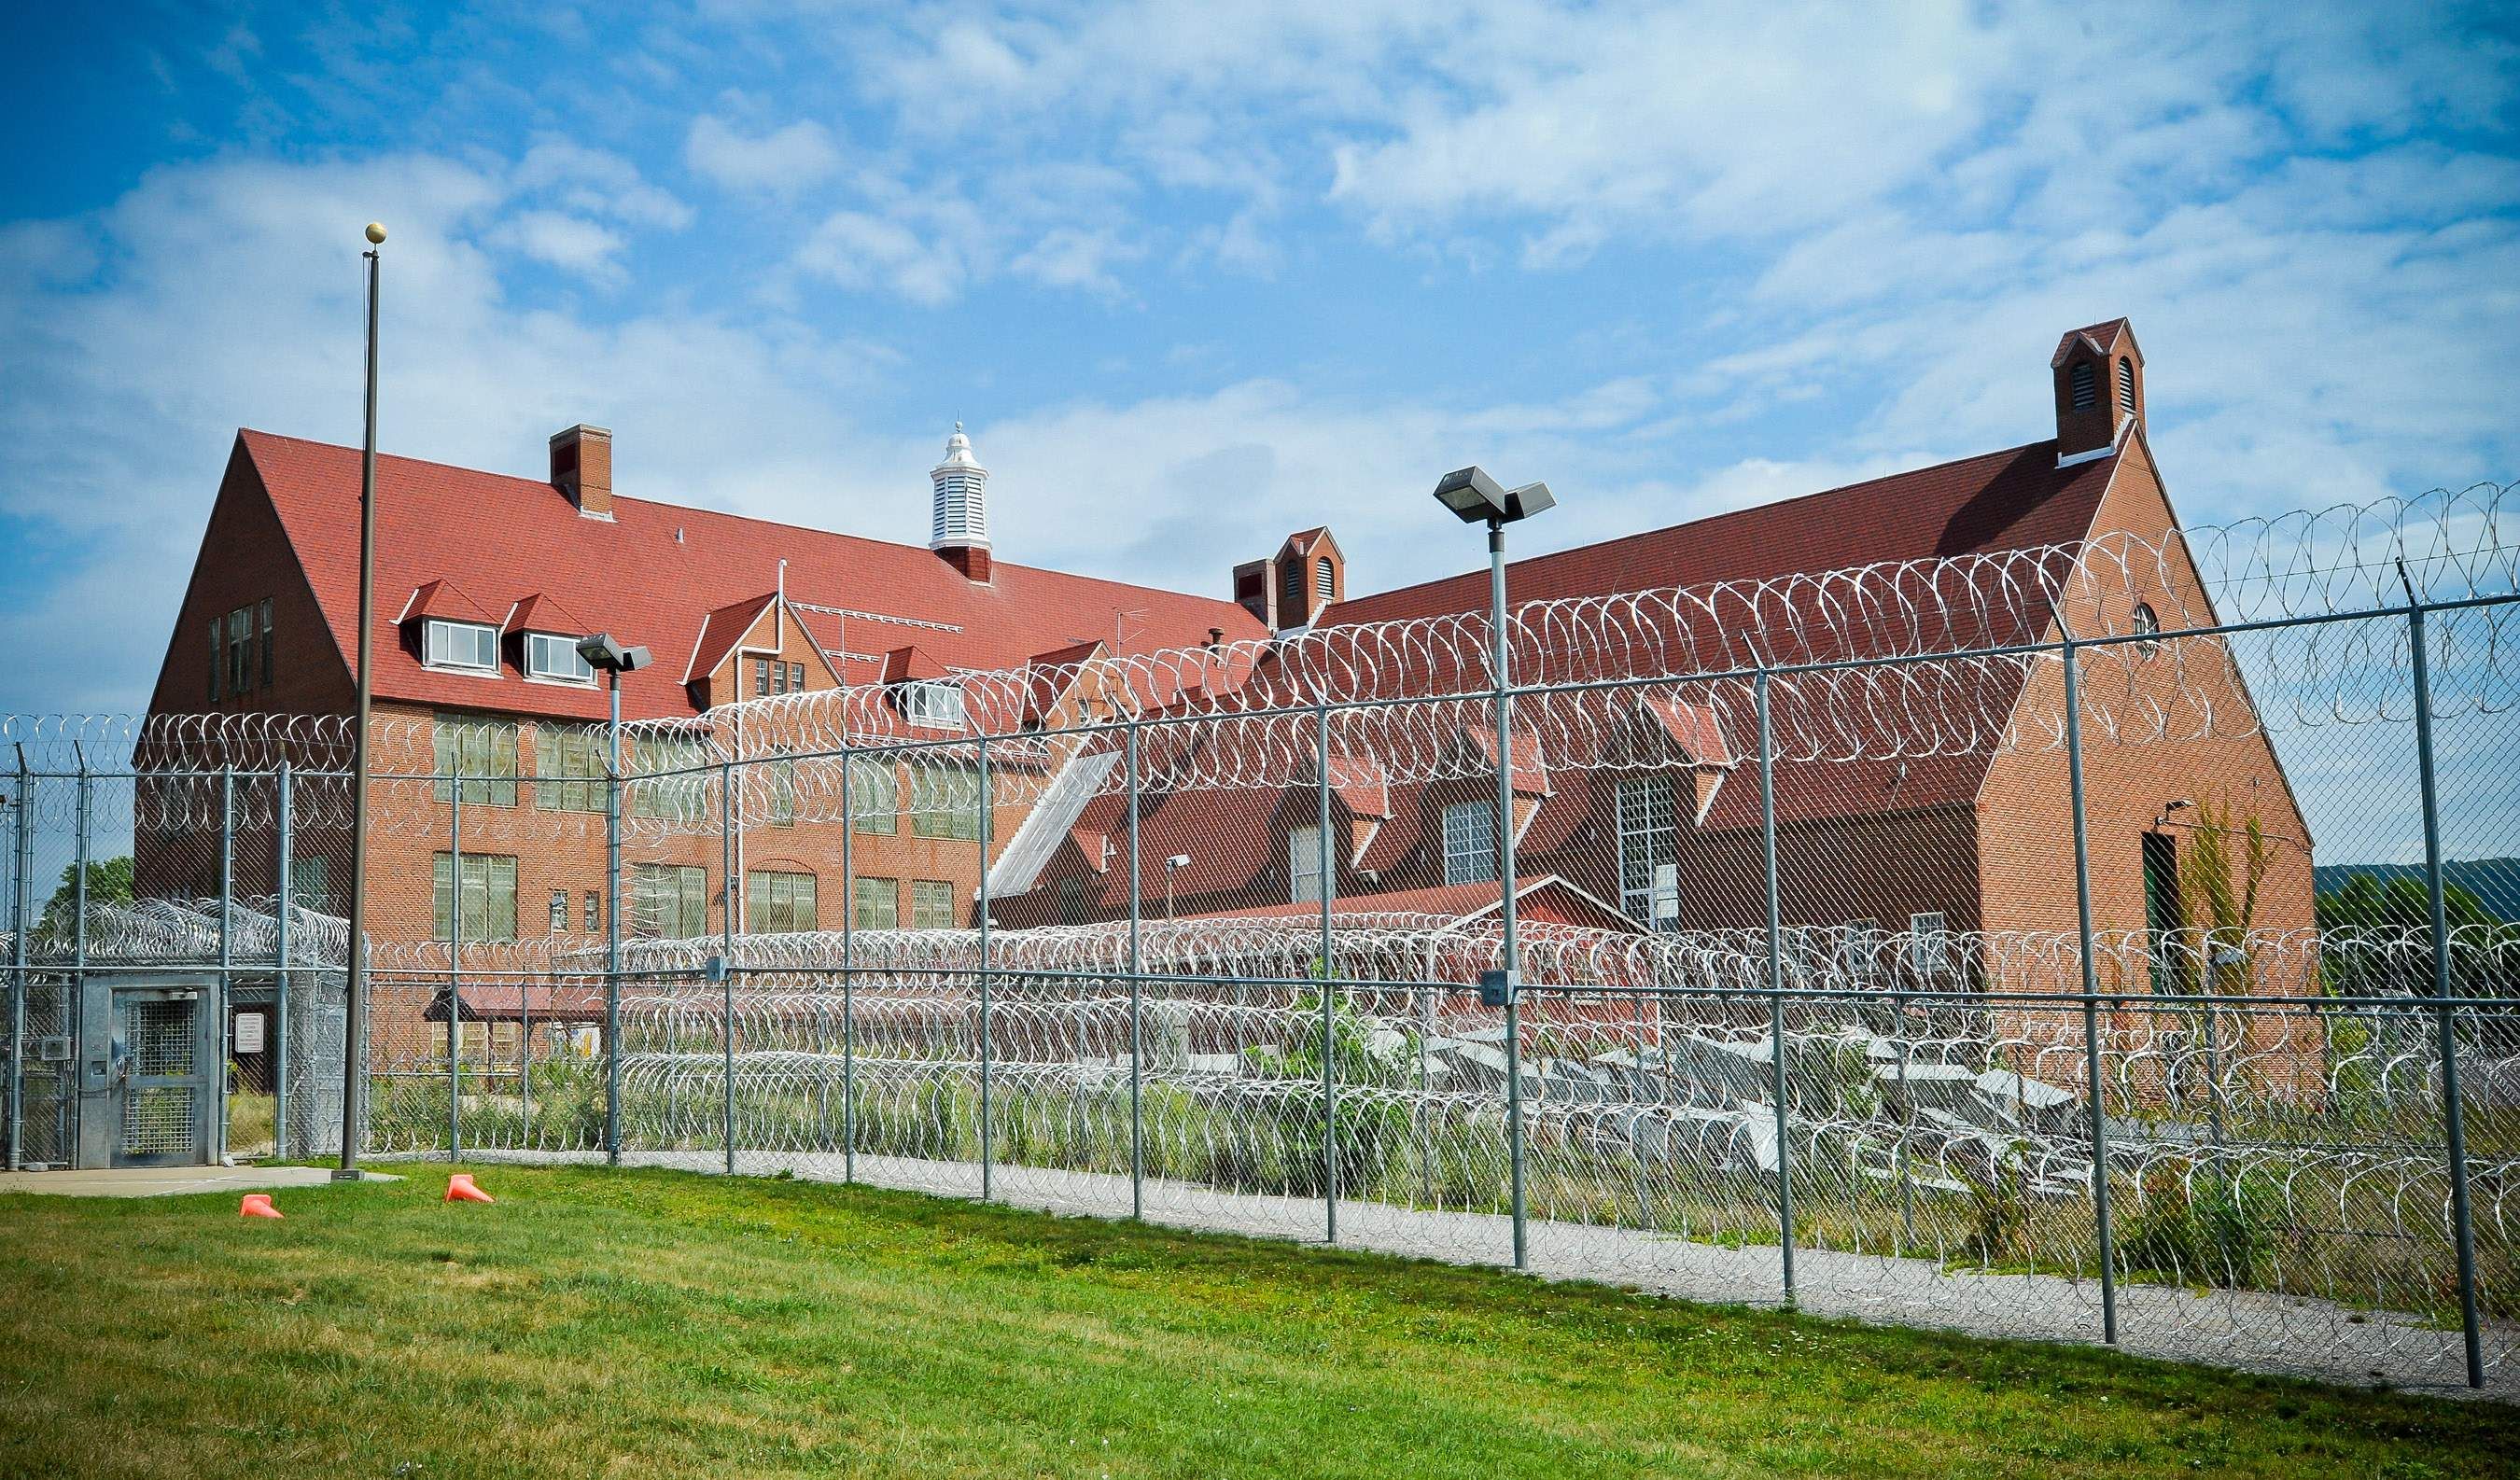 New York Prison Is About to Massive Corporate Weed Complex